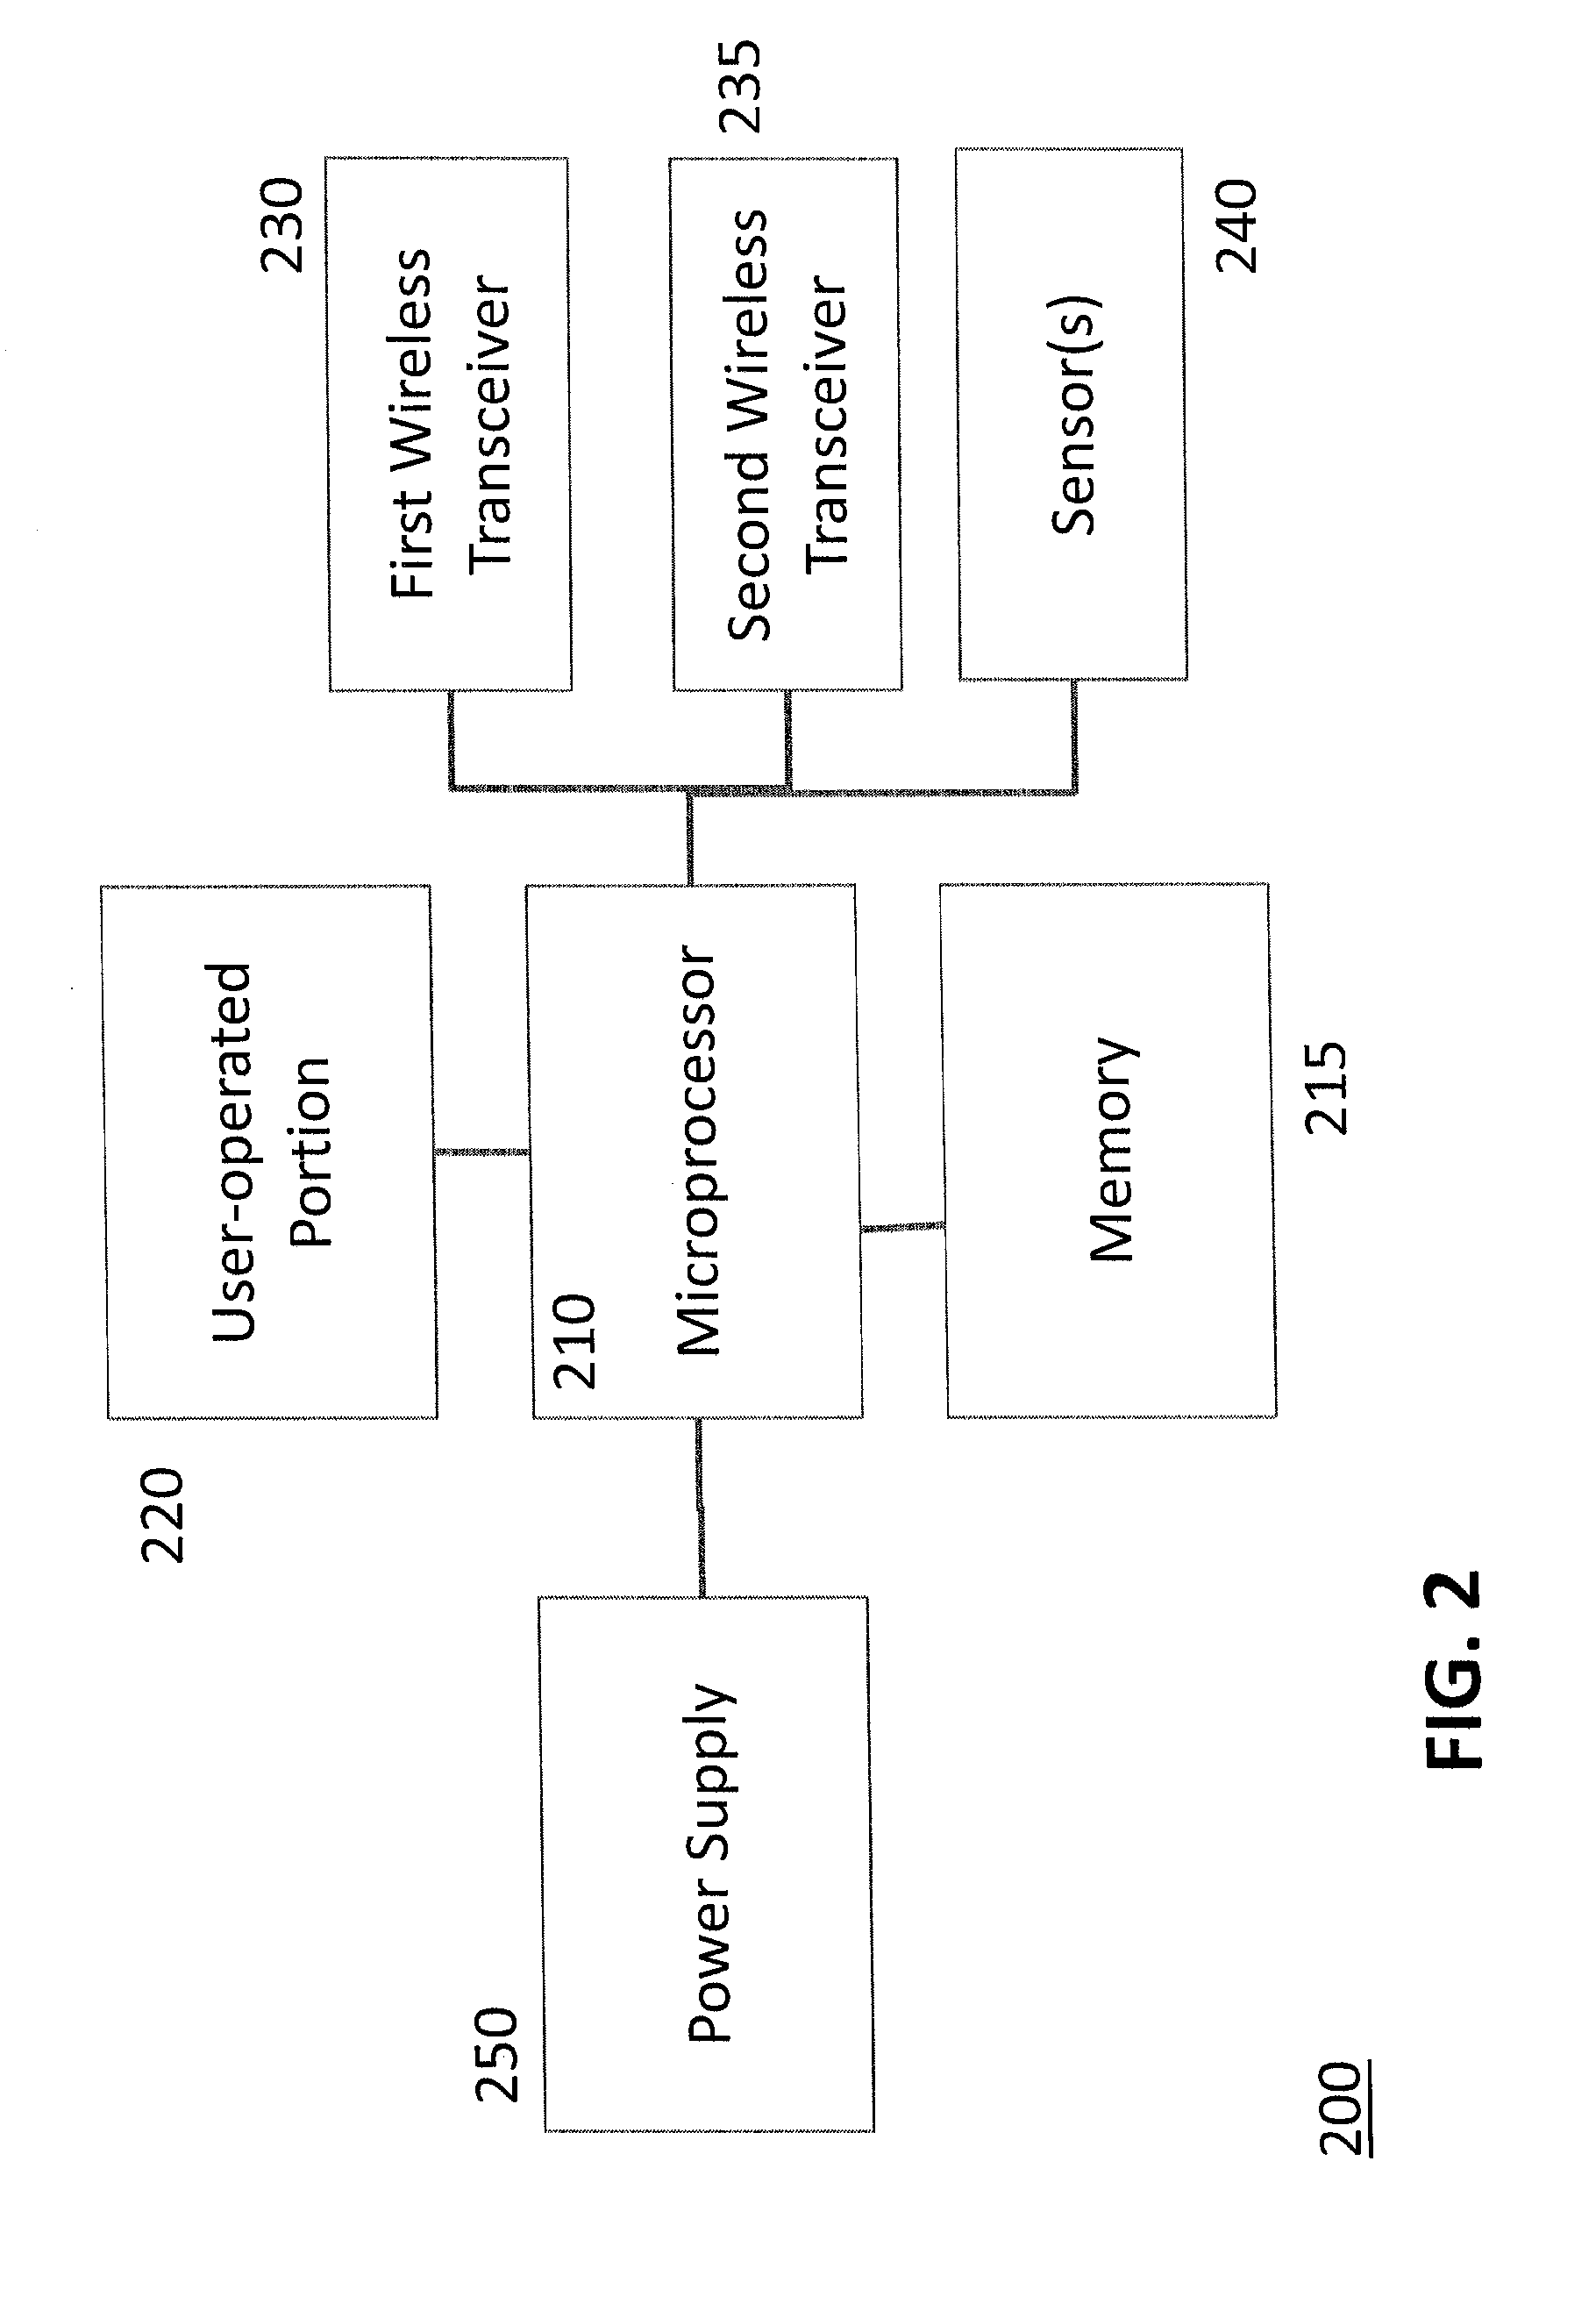 Systems, devices, methods and graphical user interface for configuring a building automation system